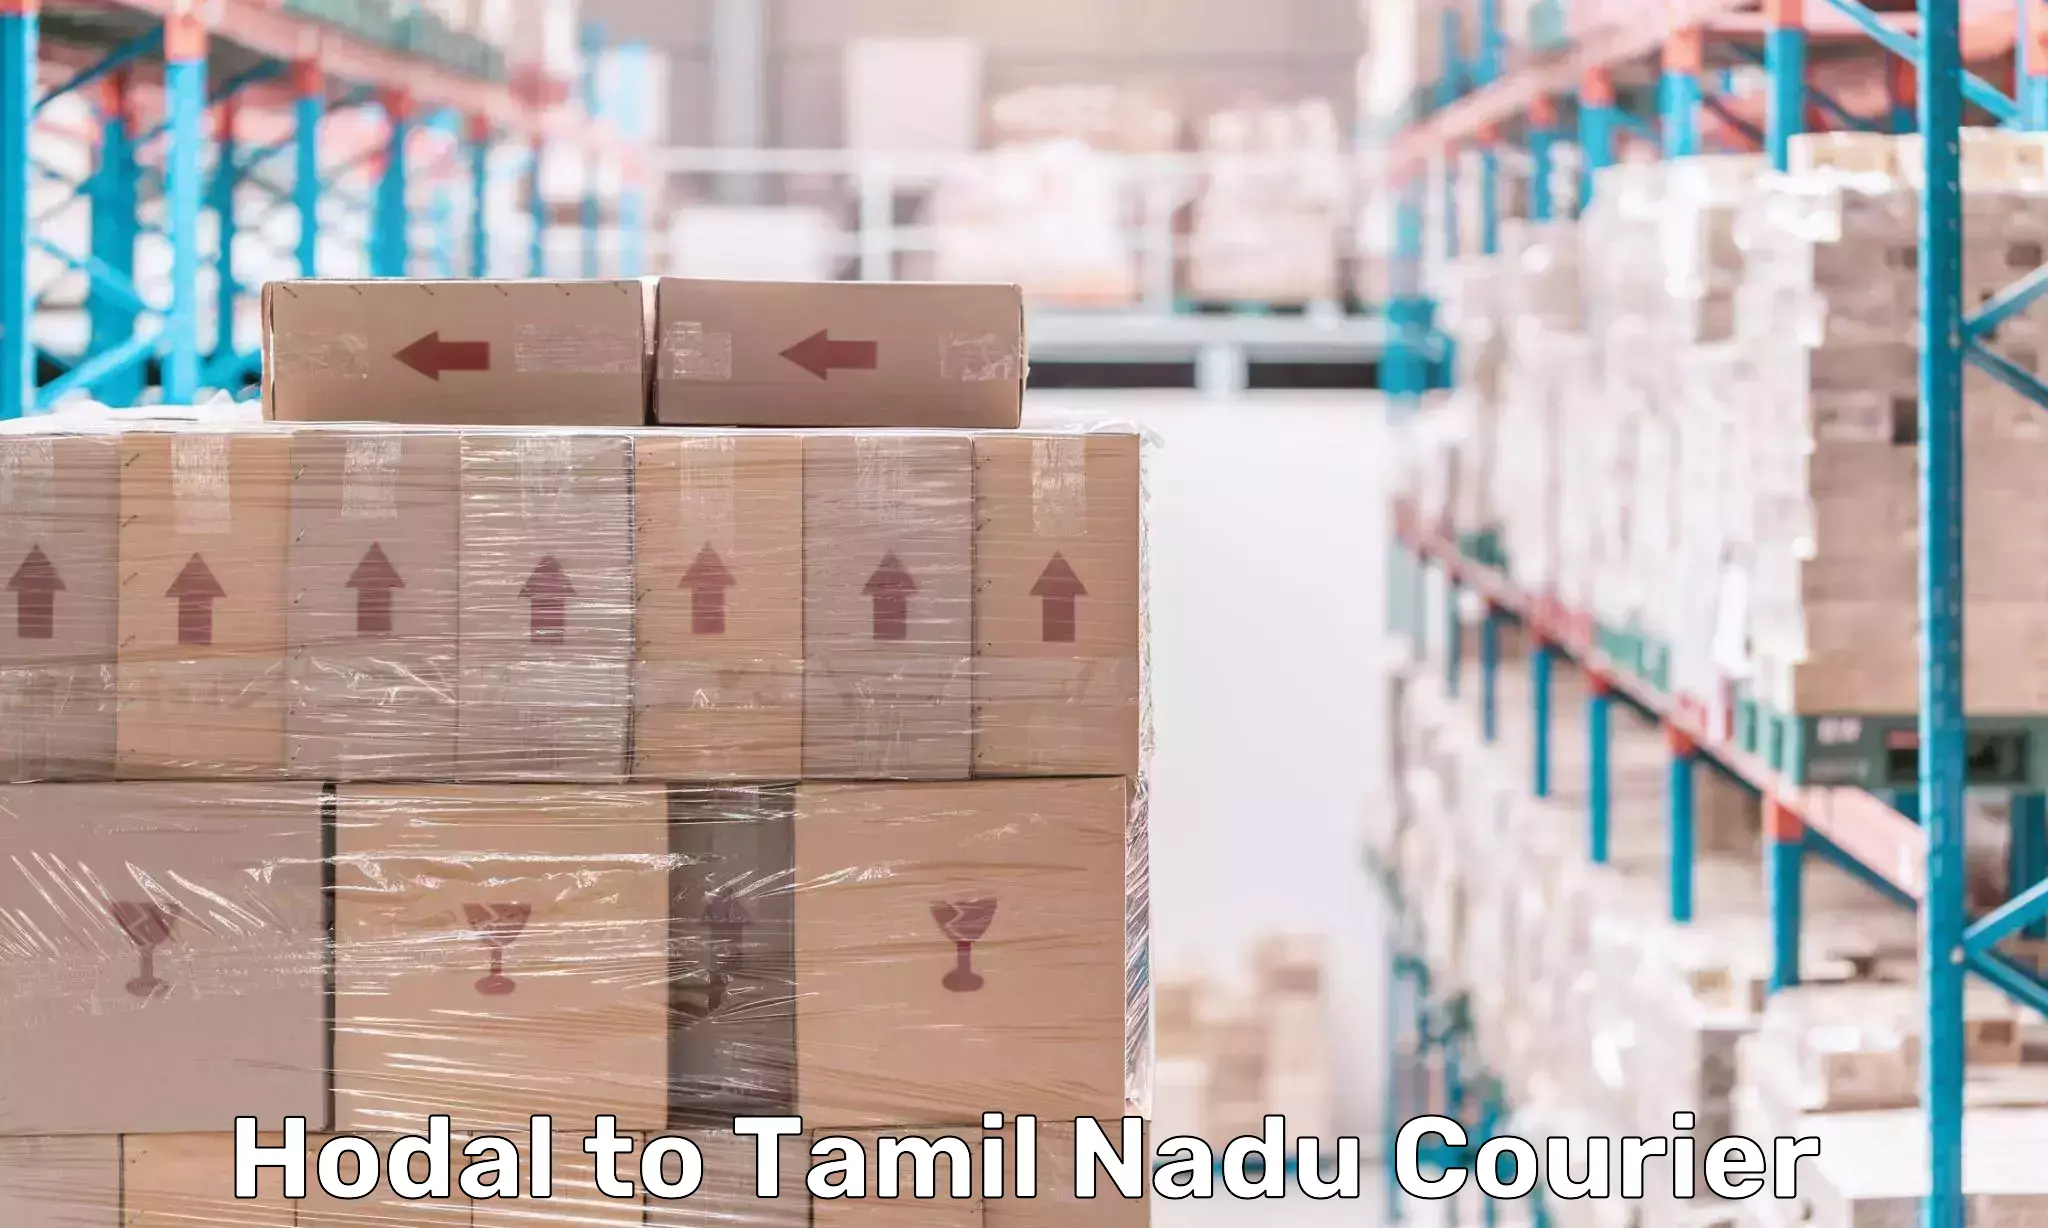 Express delivery capabilities Hodal to Tiruchi